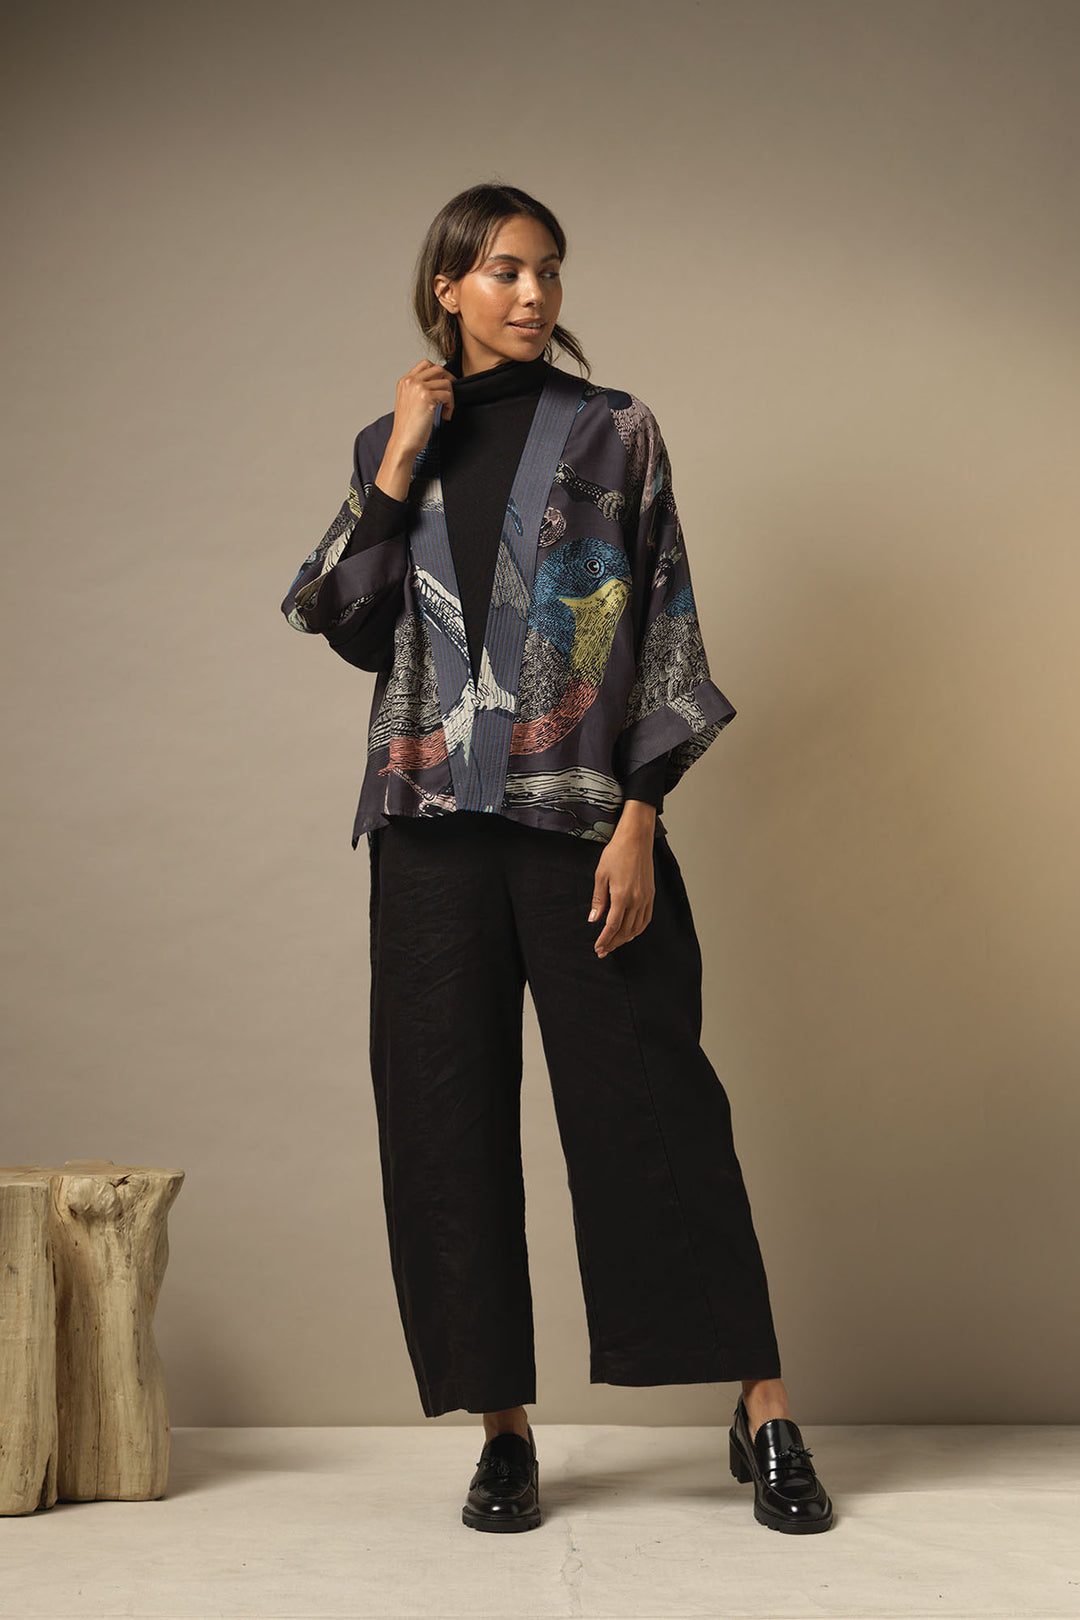 Ladies short kimono with a colourful bird print on a dark grey background by One Hundred Stars